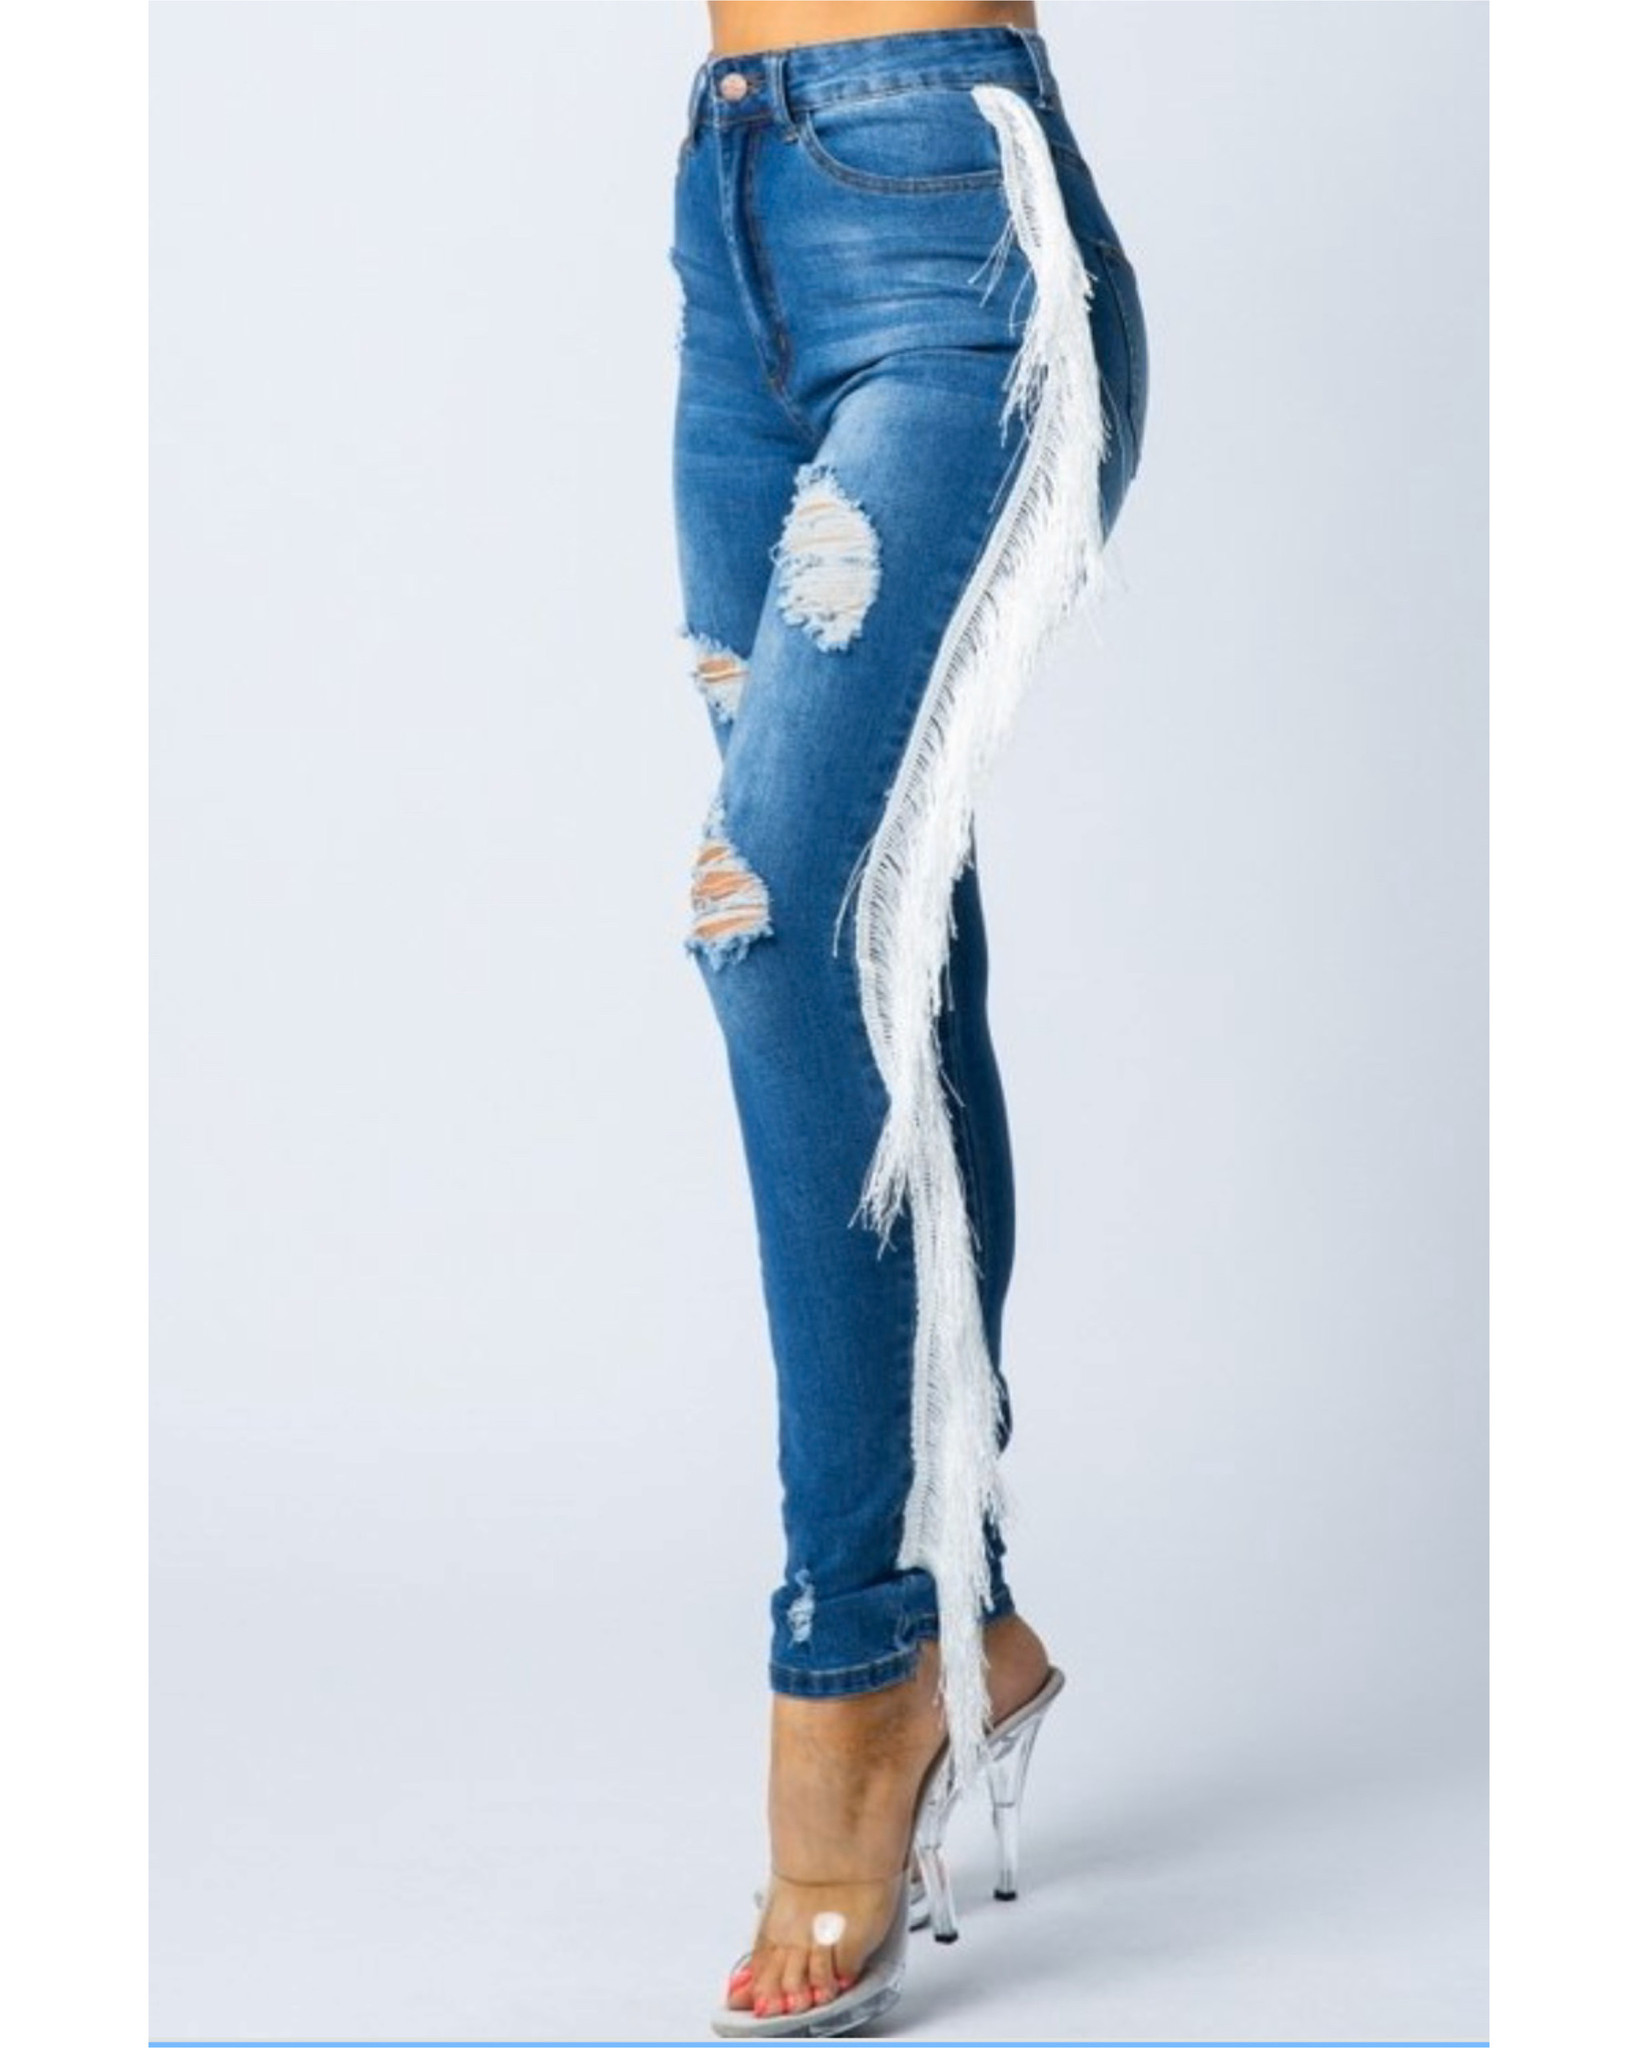 jeans with white fringe on the side